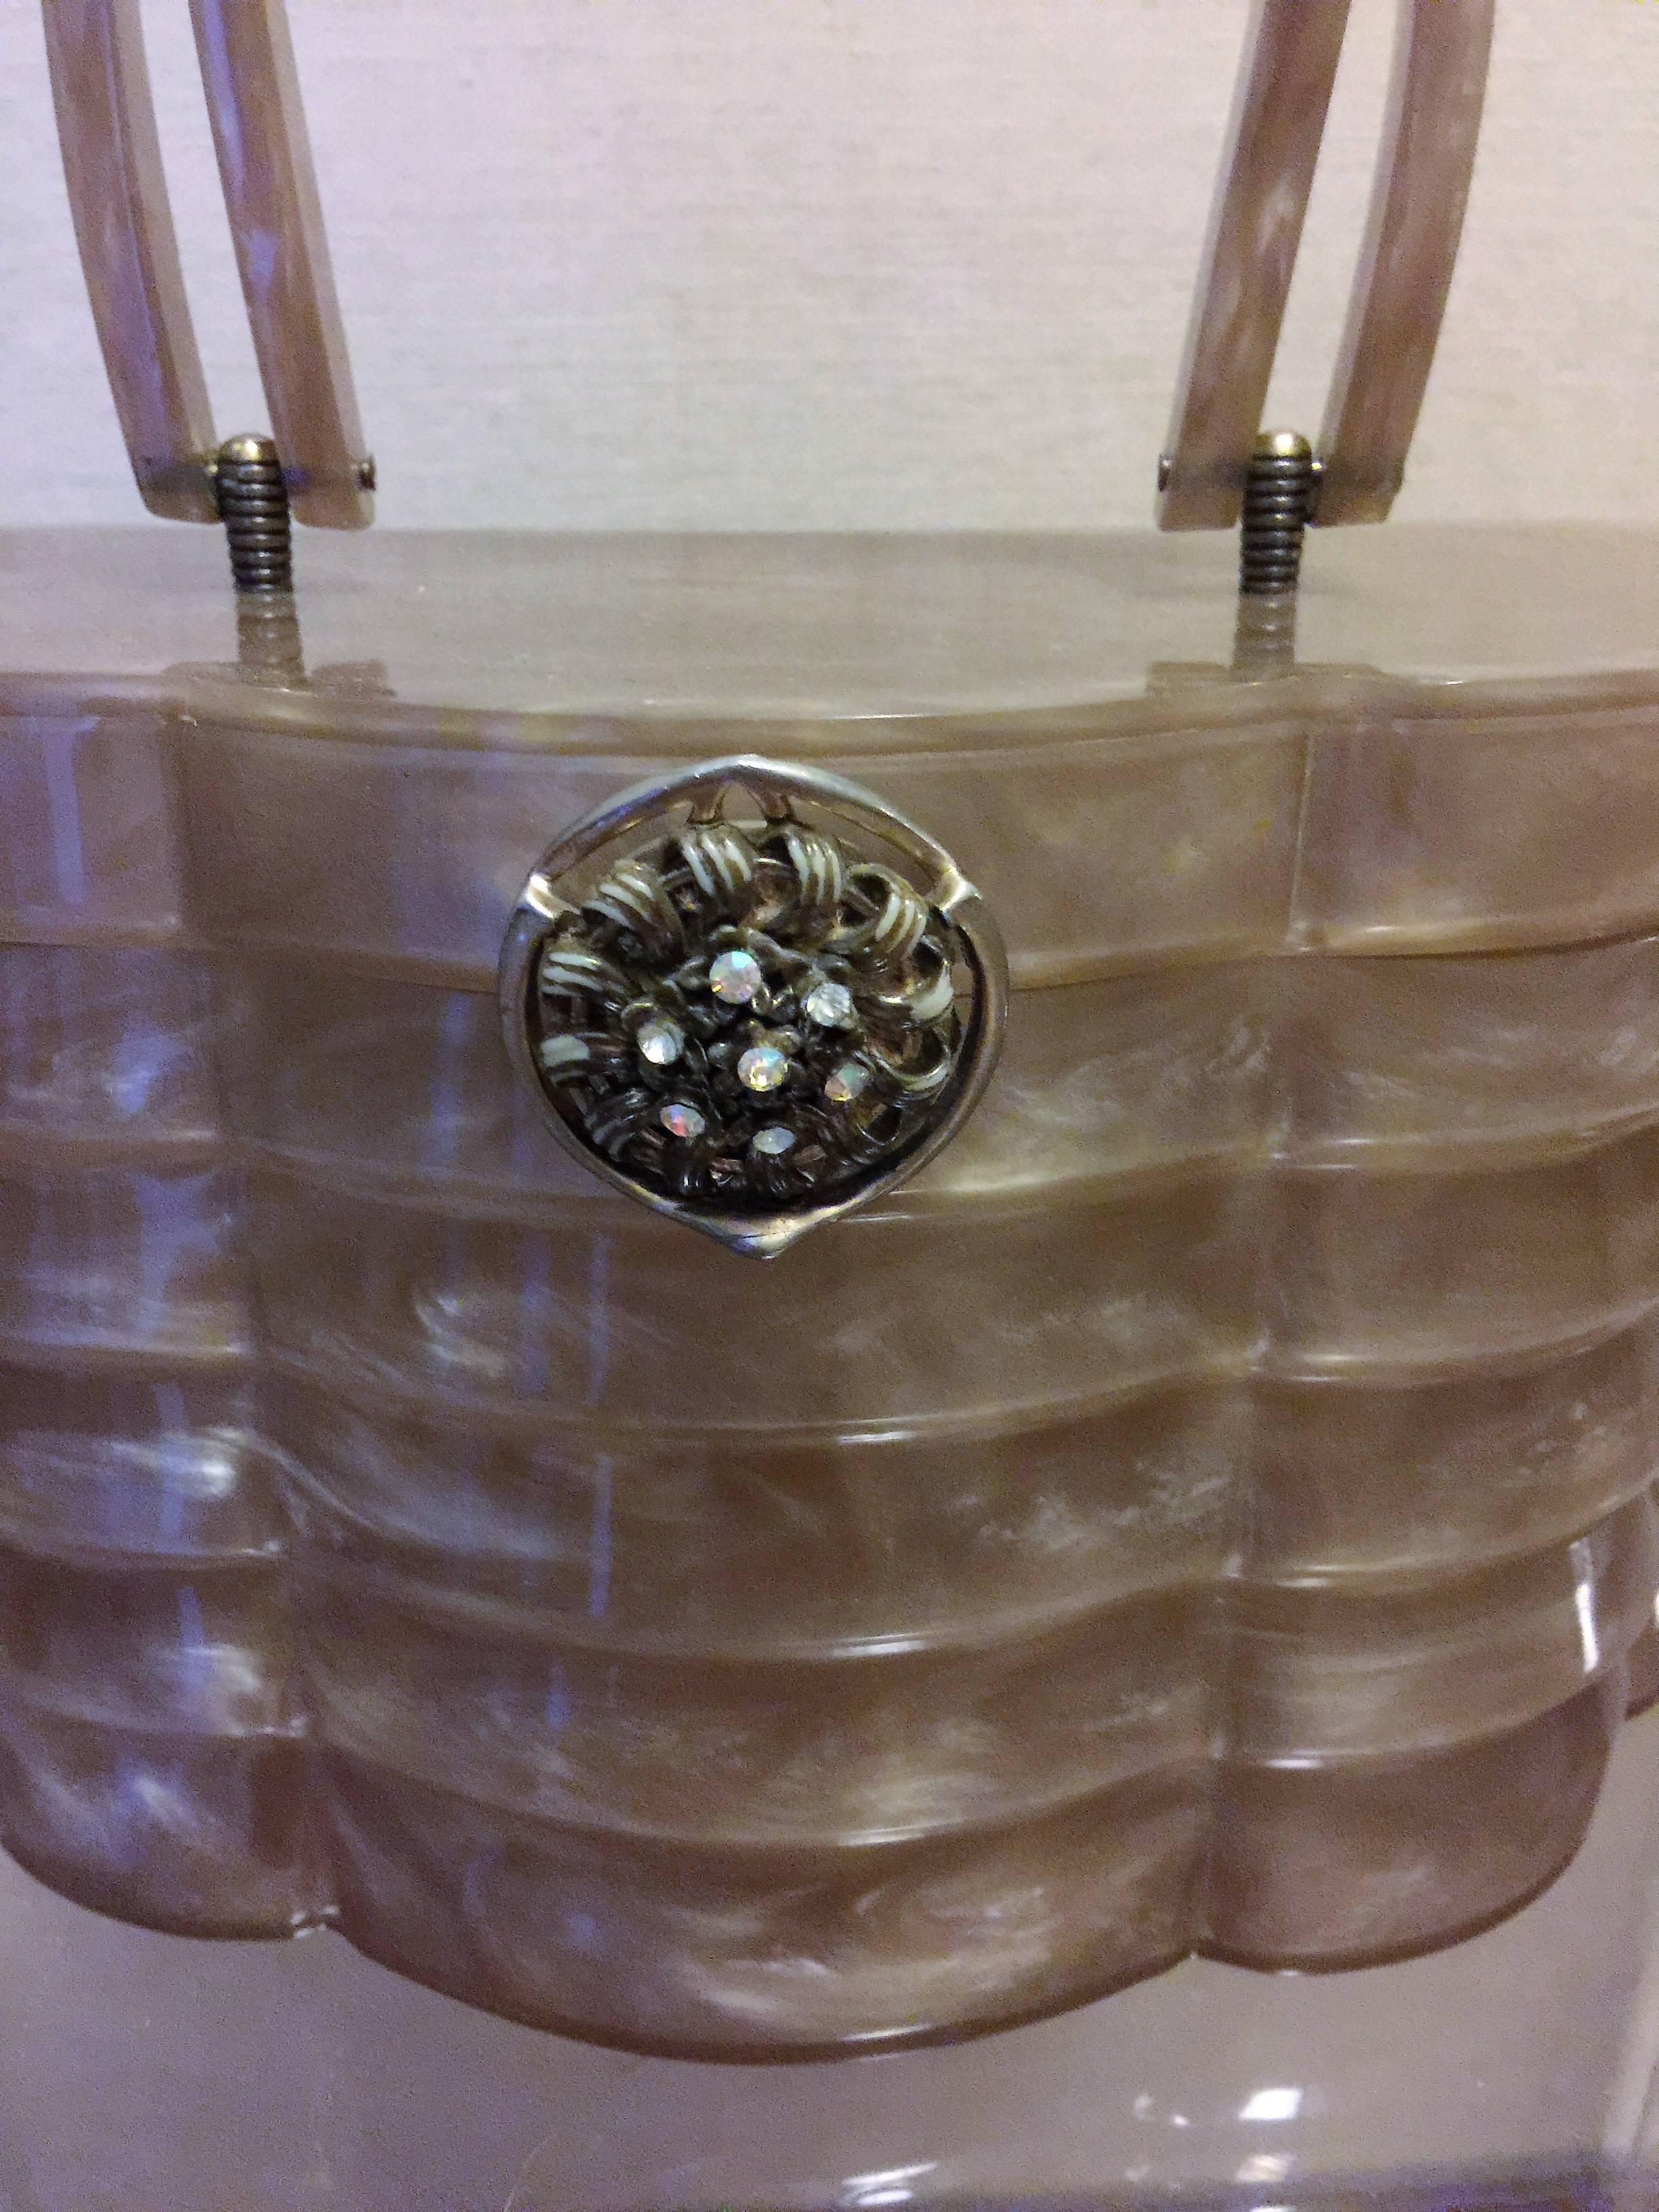 Fantastic Shaped Deep Champagne Color Wilardy Lucite Handbag.This High End Amazing Lucite Handbag is a Real Show Stopper all Hand Formed by Master Lucite Handbag Designer Wilardy.Set with a Beautiful Rhinestone Clasp this is a Great 1950's Lucite